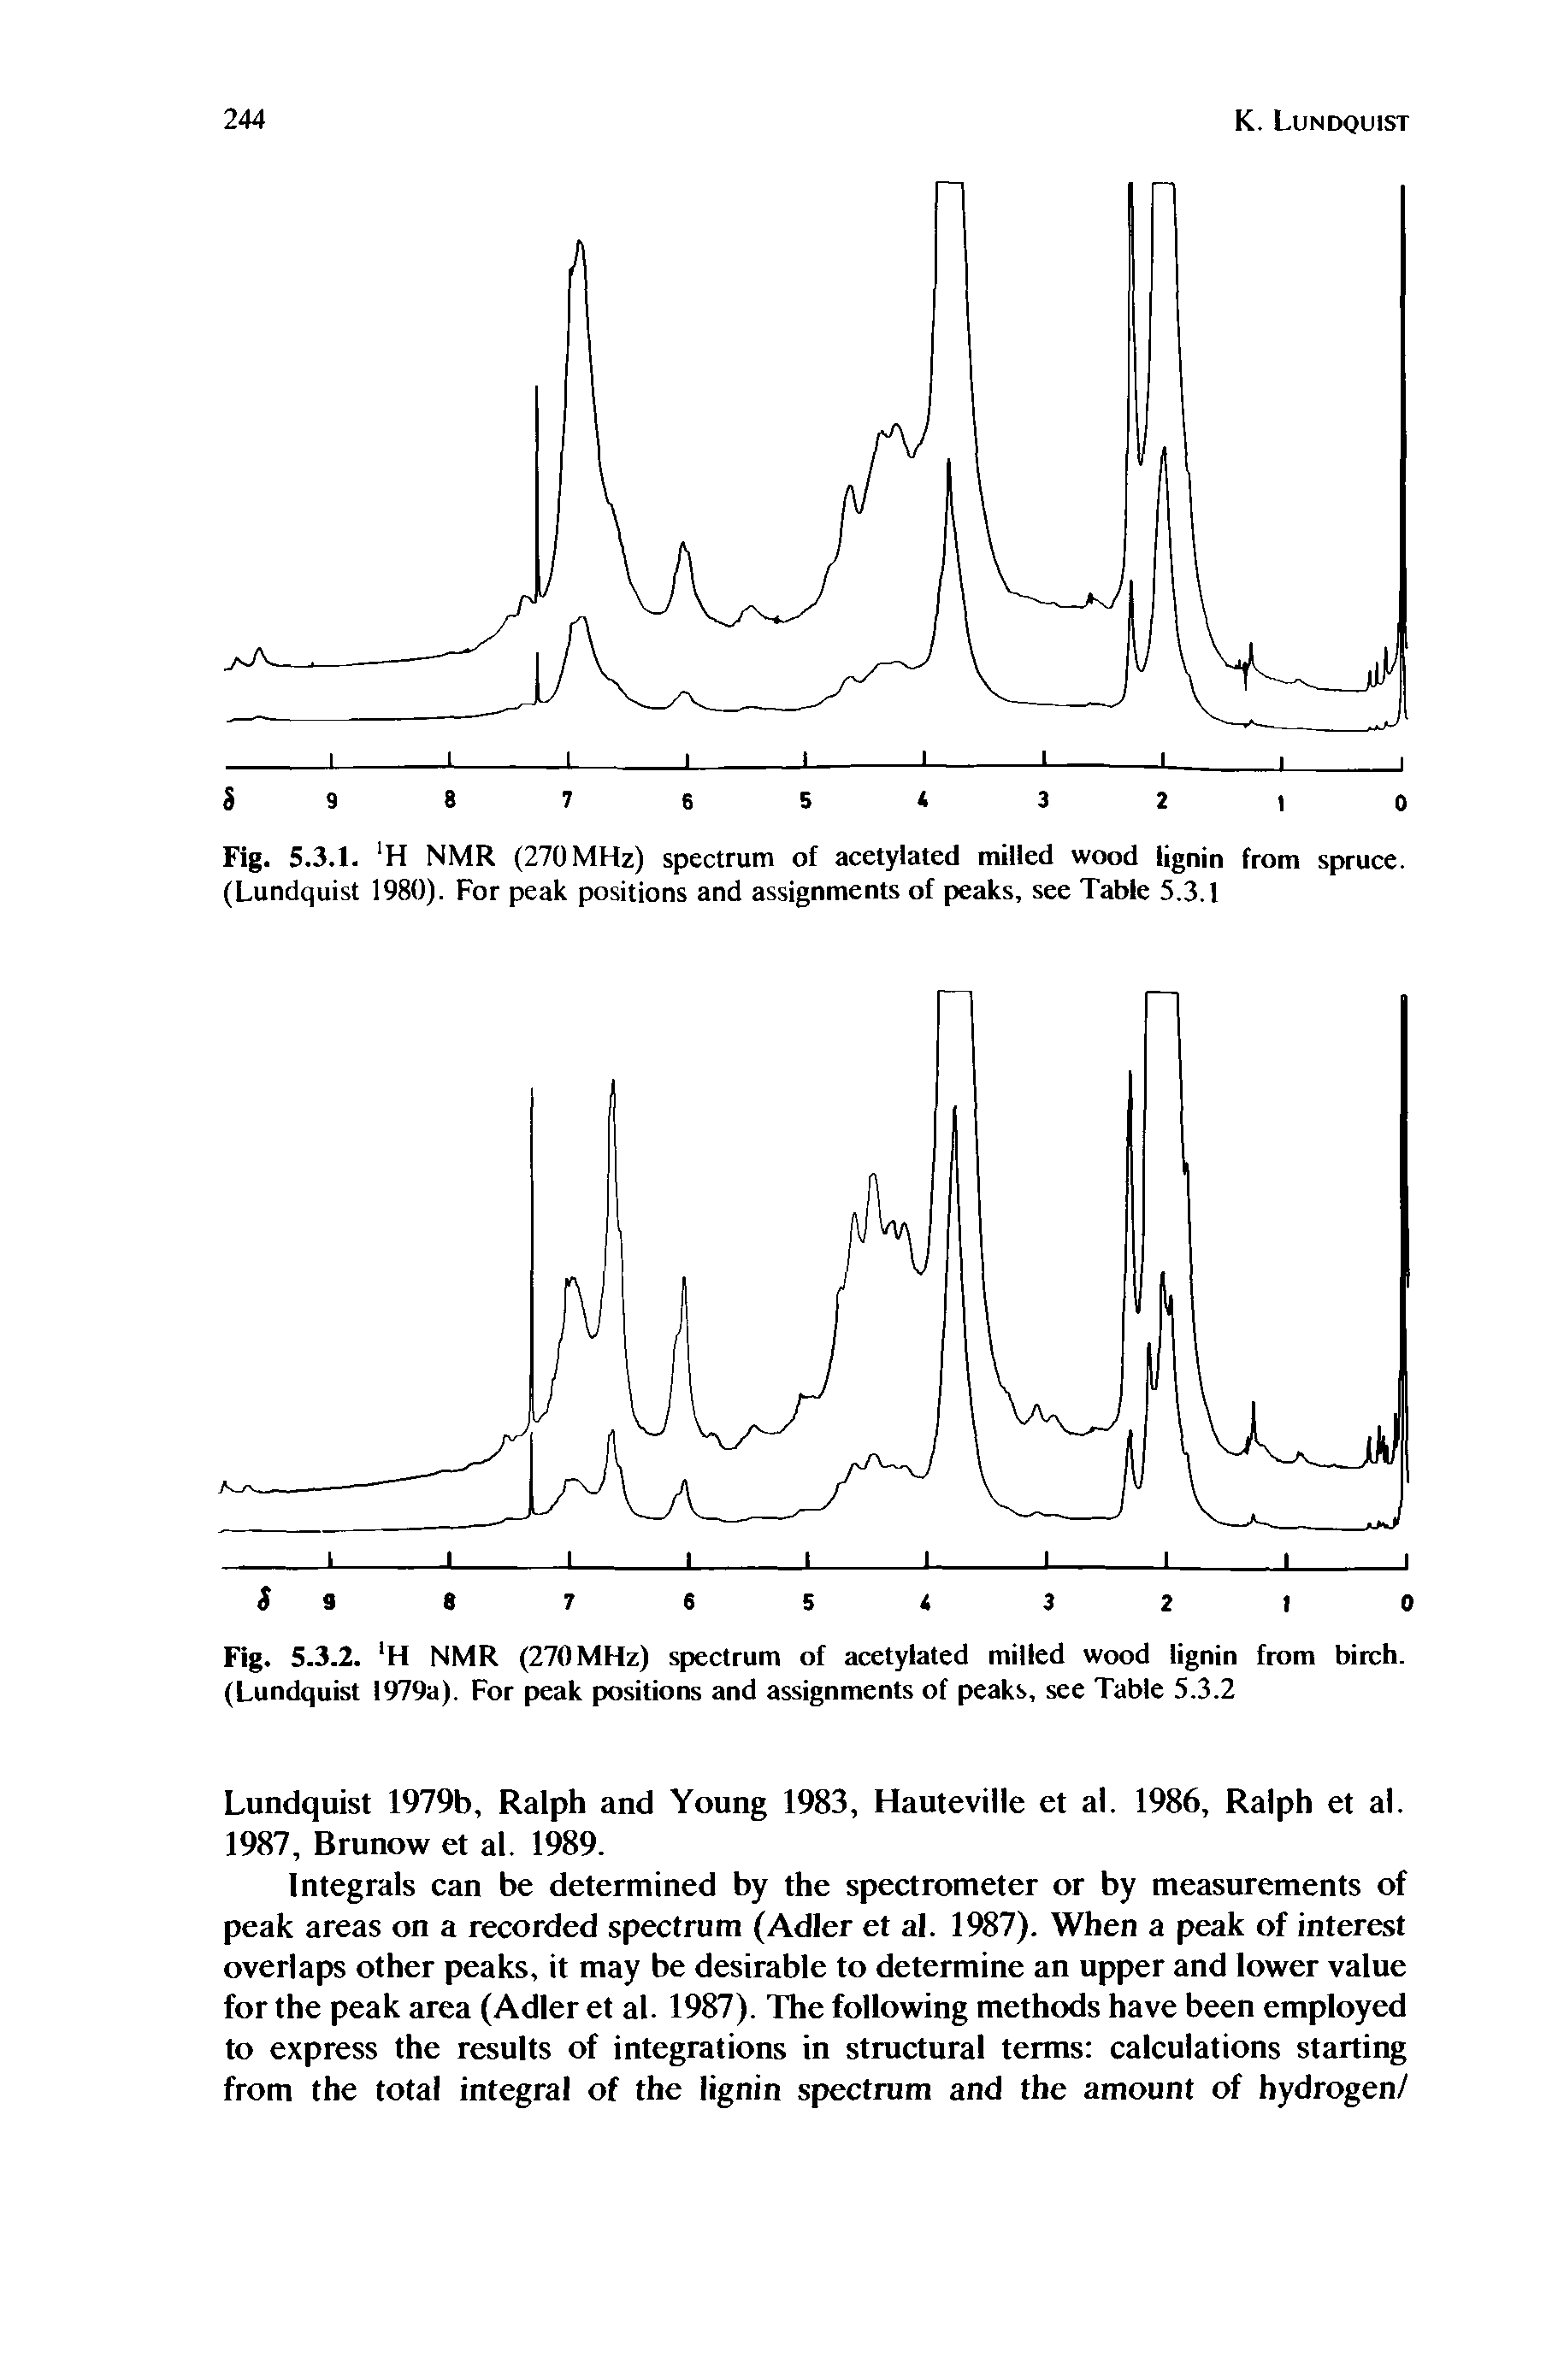 Fig. 5.3.1. H NMR (270 MHz) spectrum of acetylated milled wood lignin from spruce. (Lundquist 1980). For peak positions and assignments of peaks, see Table 5.3.1...